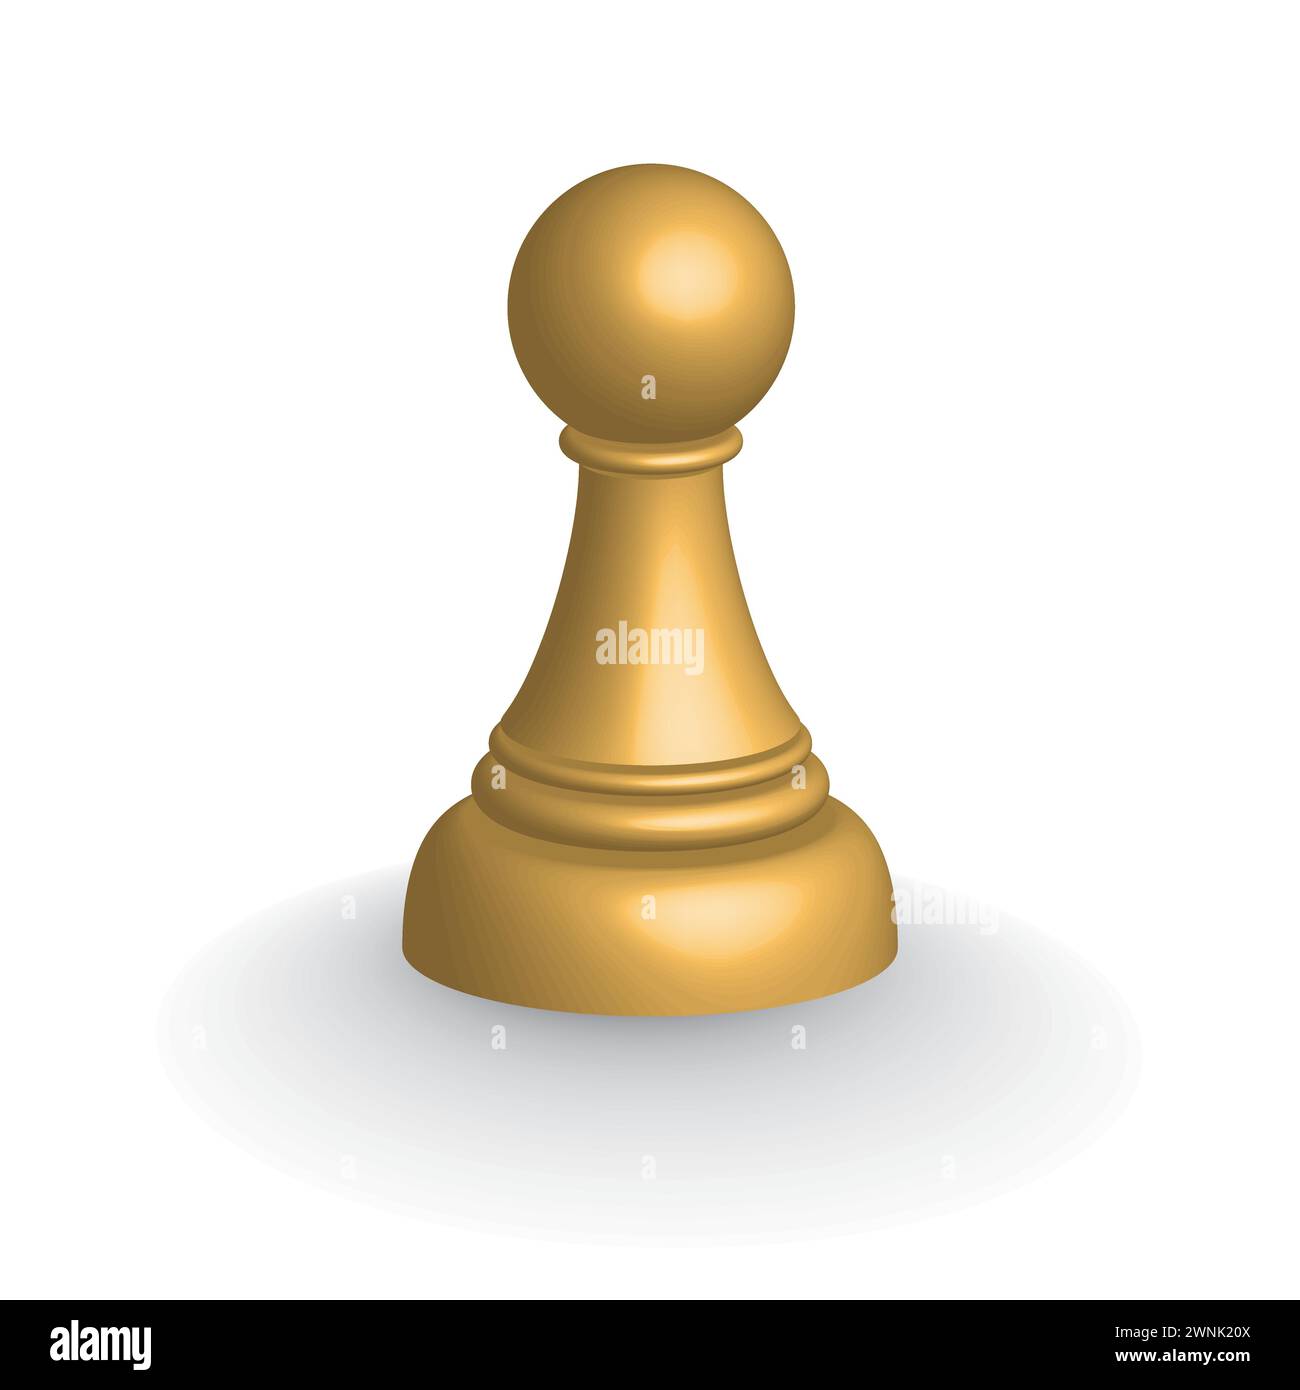 3d golden chess pawn isolated on white background. Isometric chess piece icon vector illustration. Stock Vector